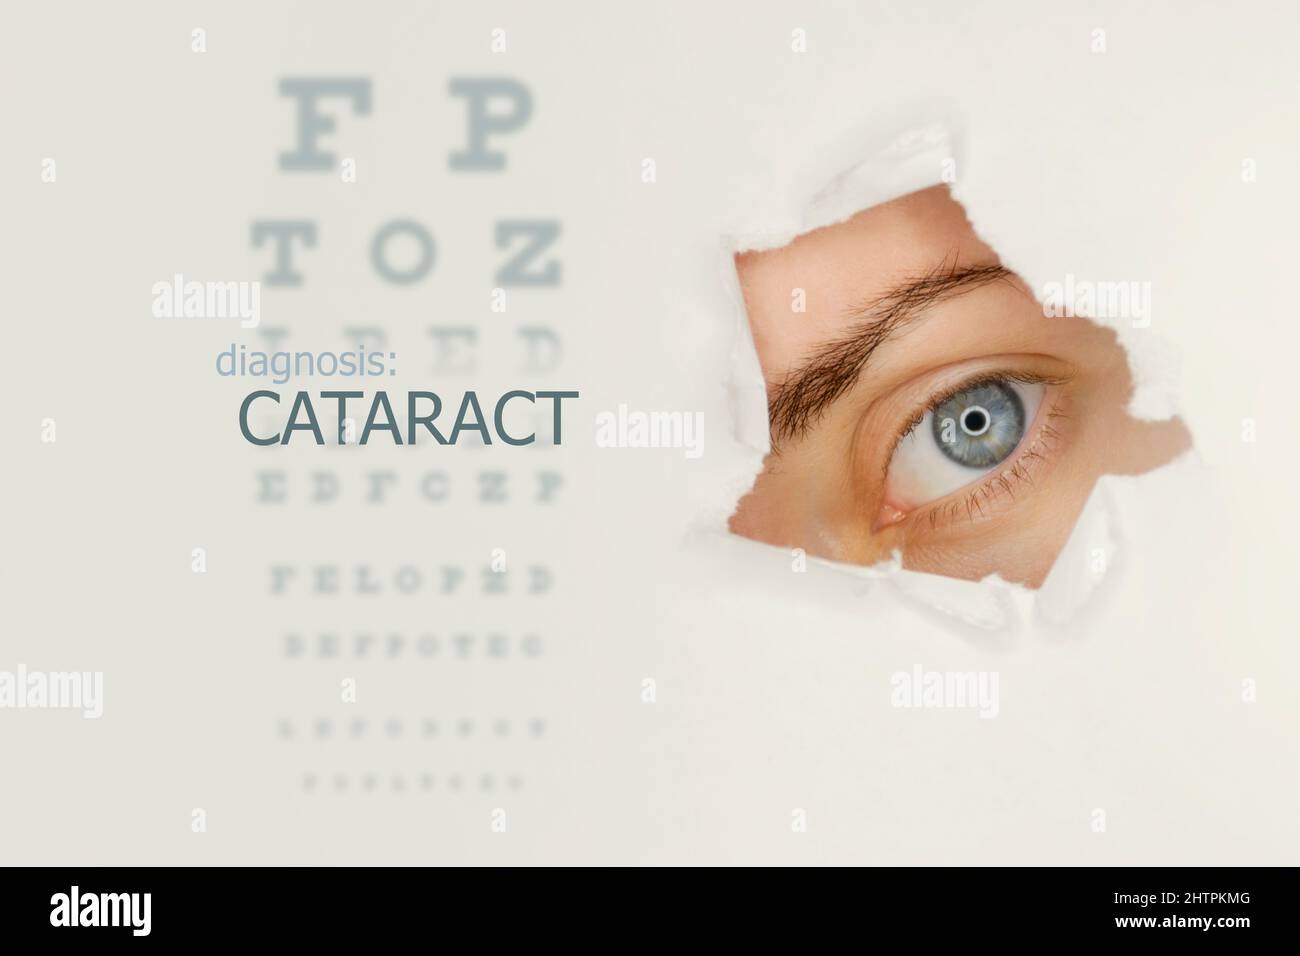 Cataract disease poster wwith eye test chart and blue eye on right. Studio grey background Stock Photo